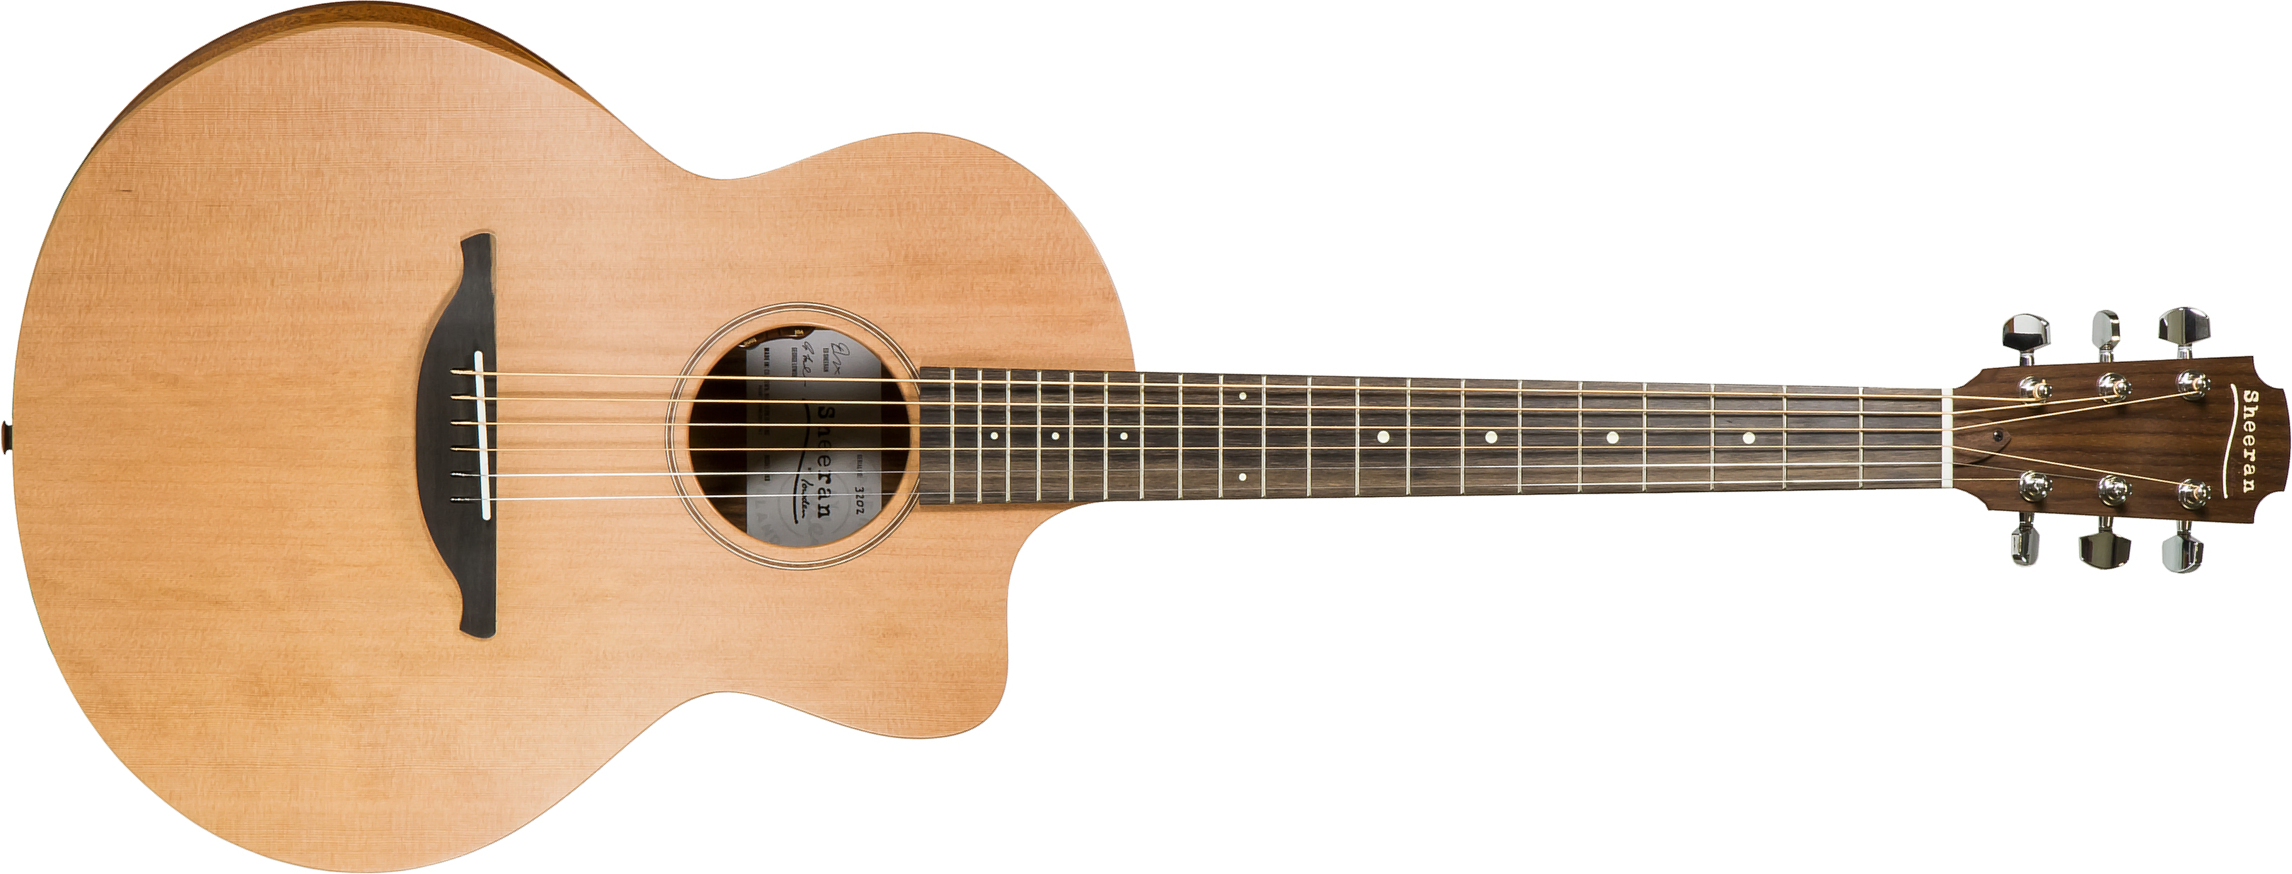 Sheeran By Lowden S03 Orchestra Model Cedre Palissandre Eb +housse - Natural Satin - Westerngitarre & electro - Main picture